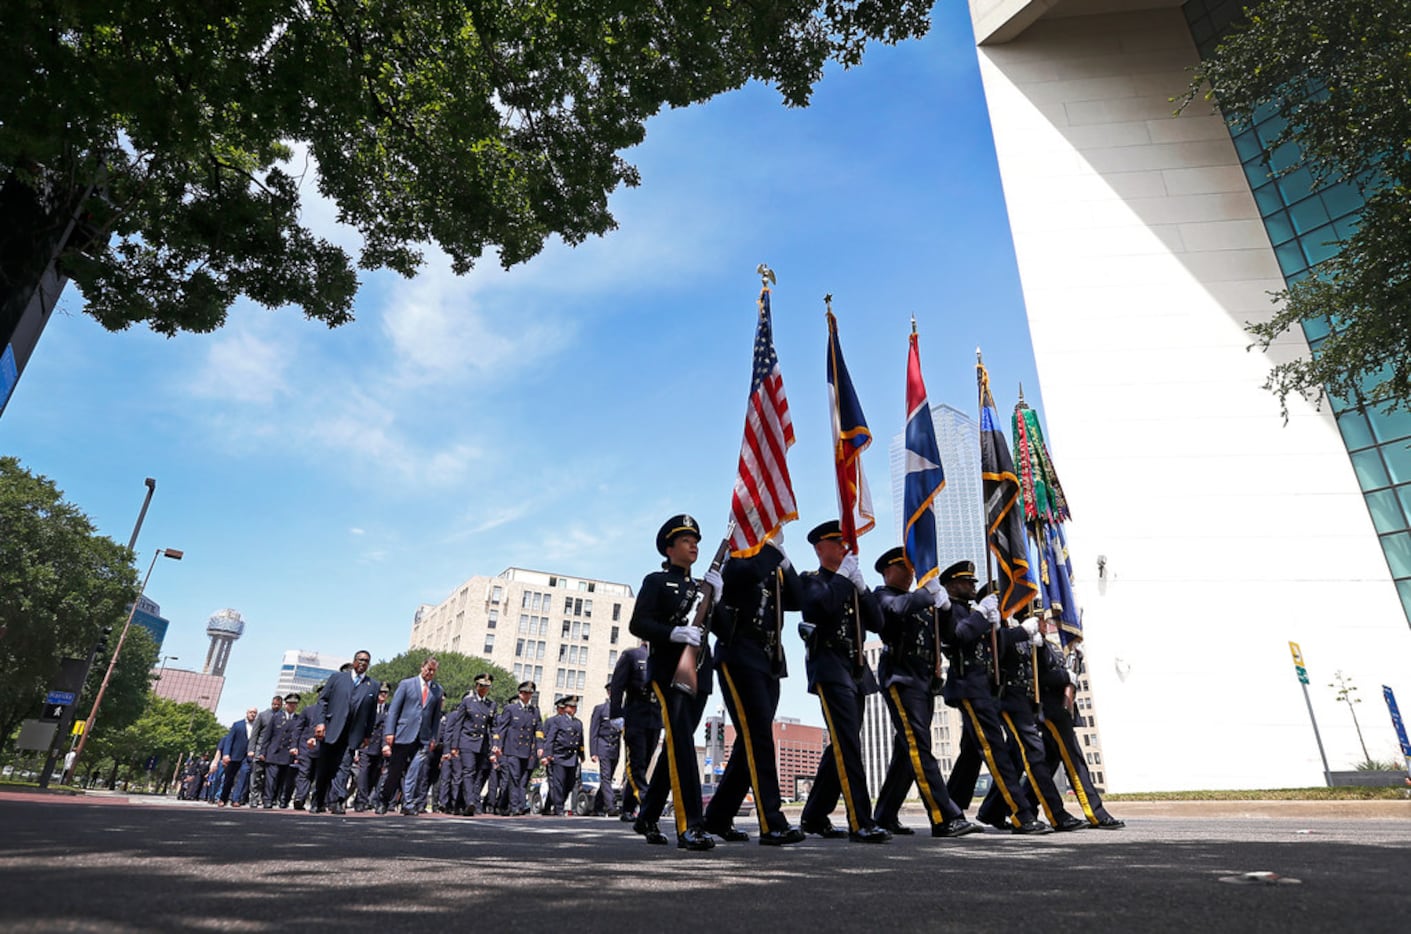 A Dallas Police Honor Guard marched Wednesday during a service commemorating fallen police...